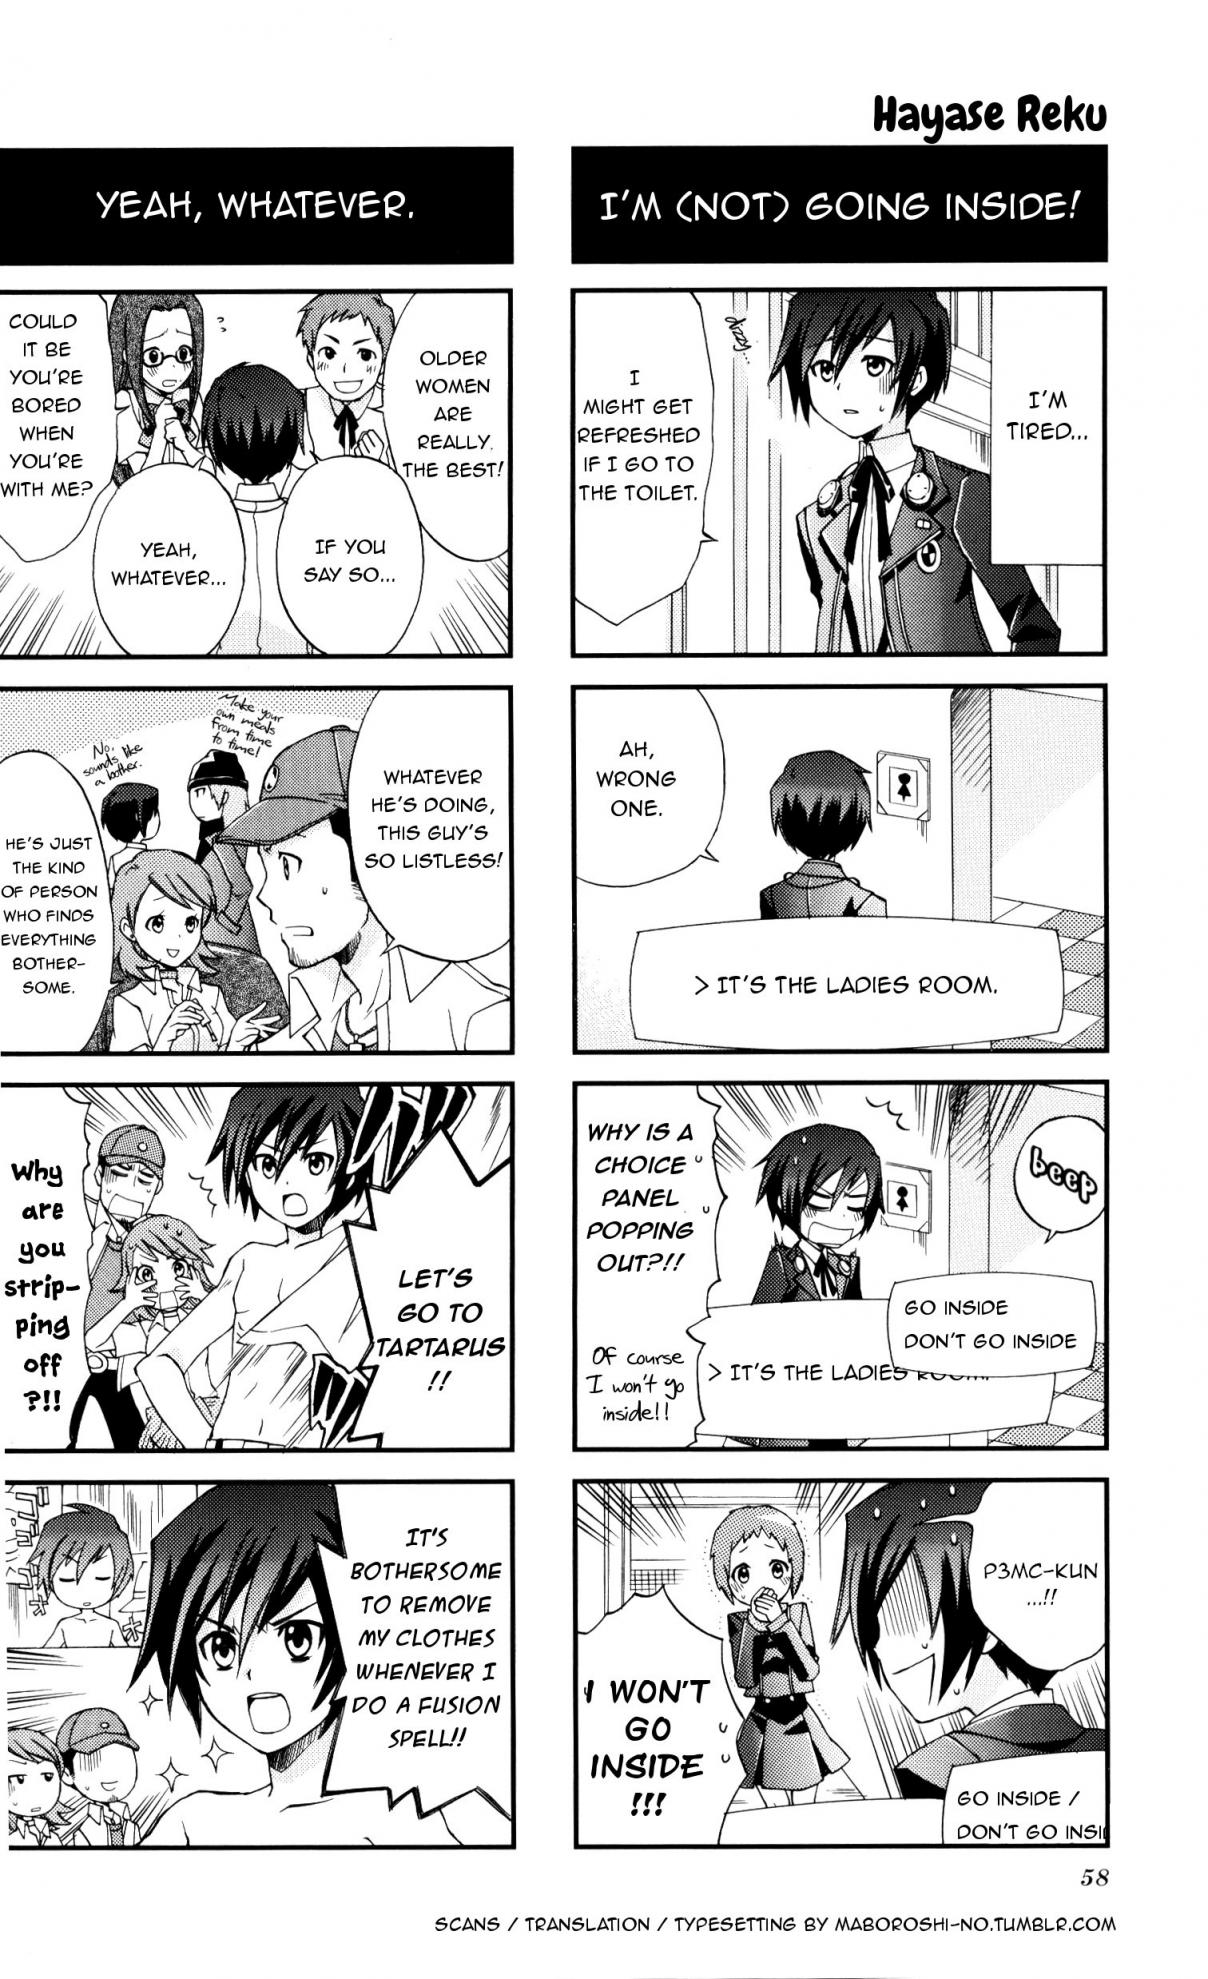 Persona 3 4koma Gag Battle Vol. 2 Ch. 9 Any attack gets nullified! (Artist